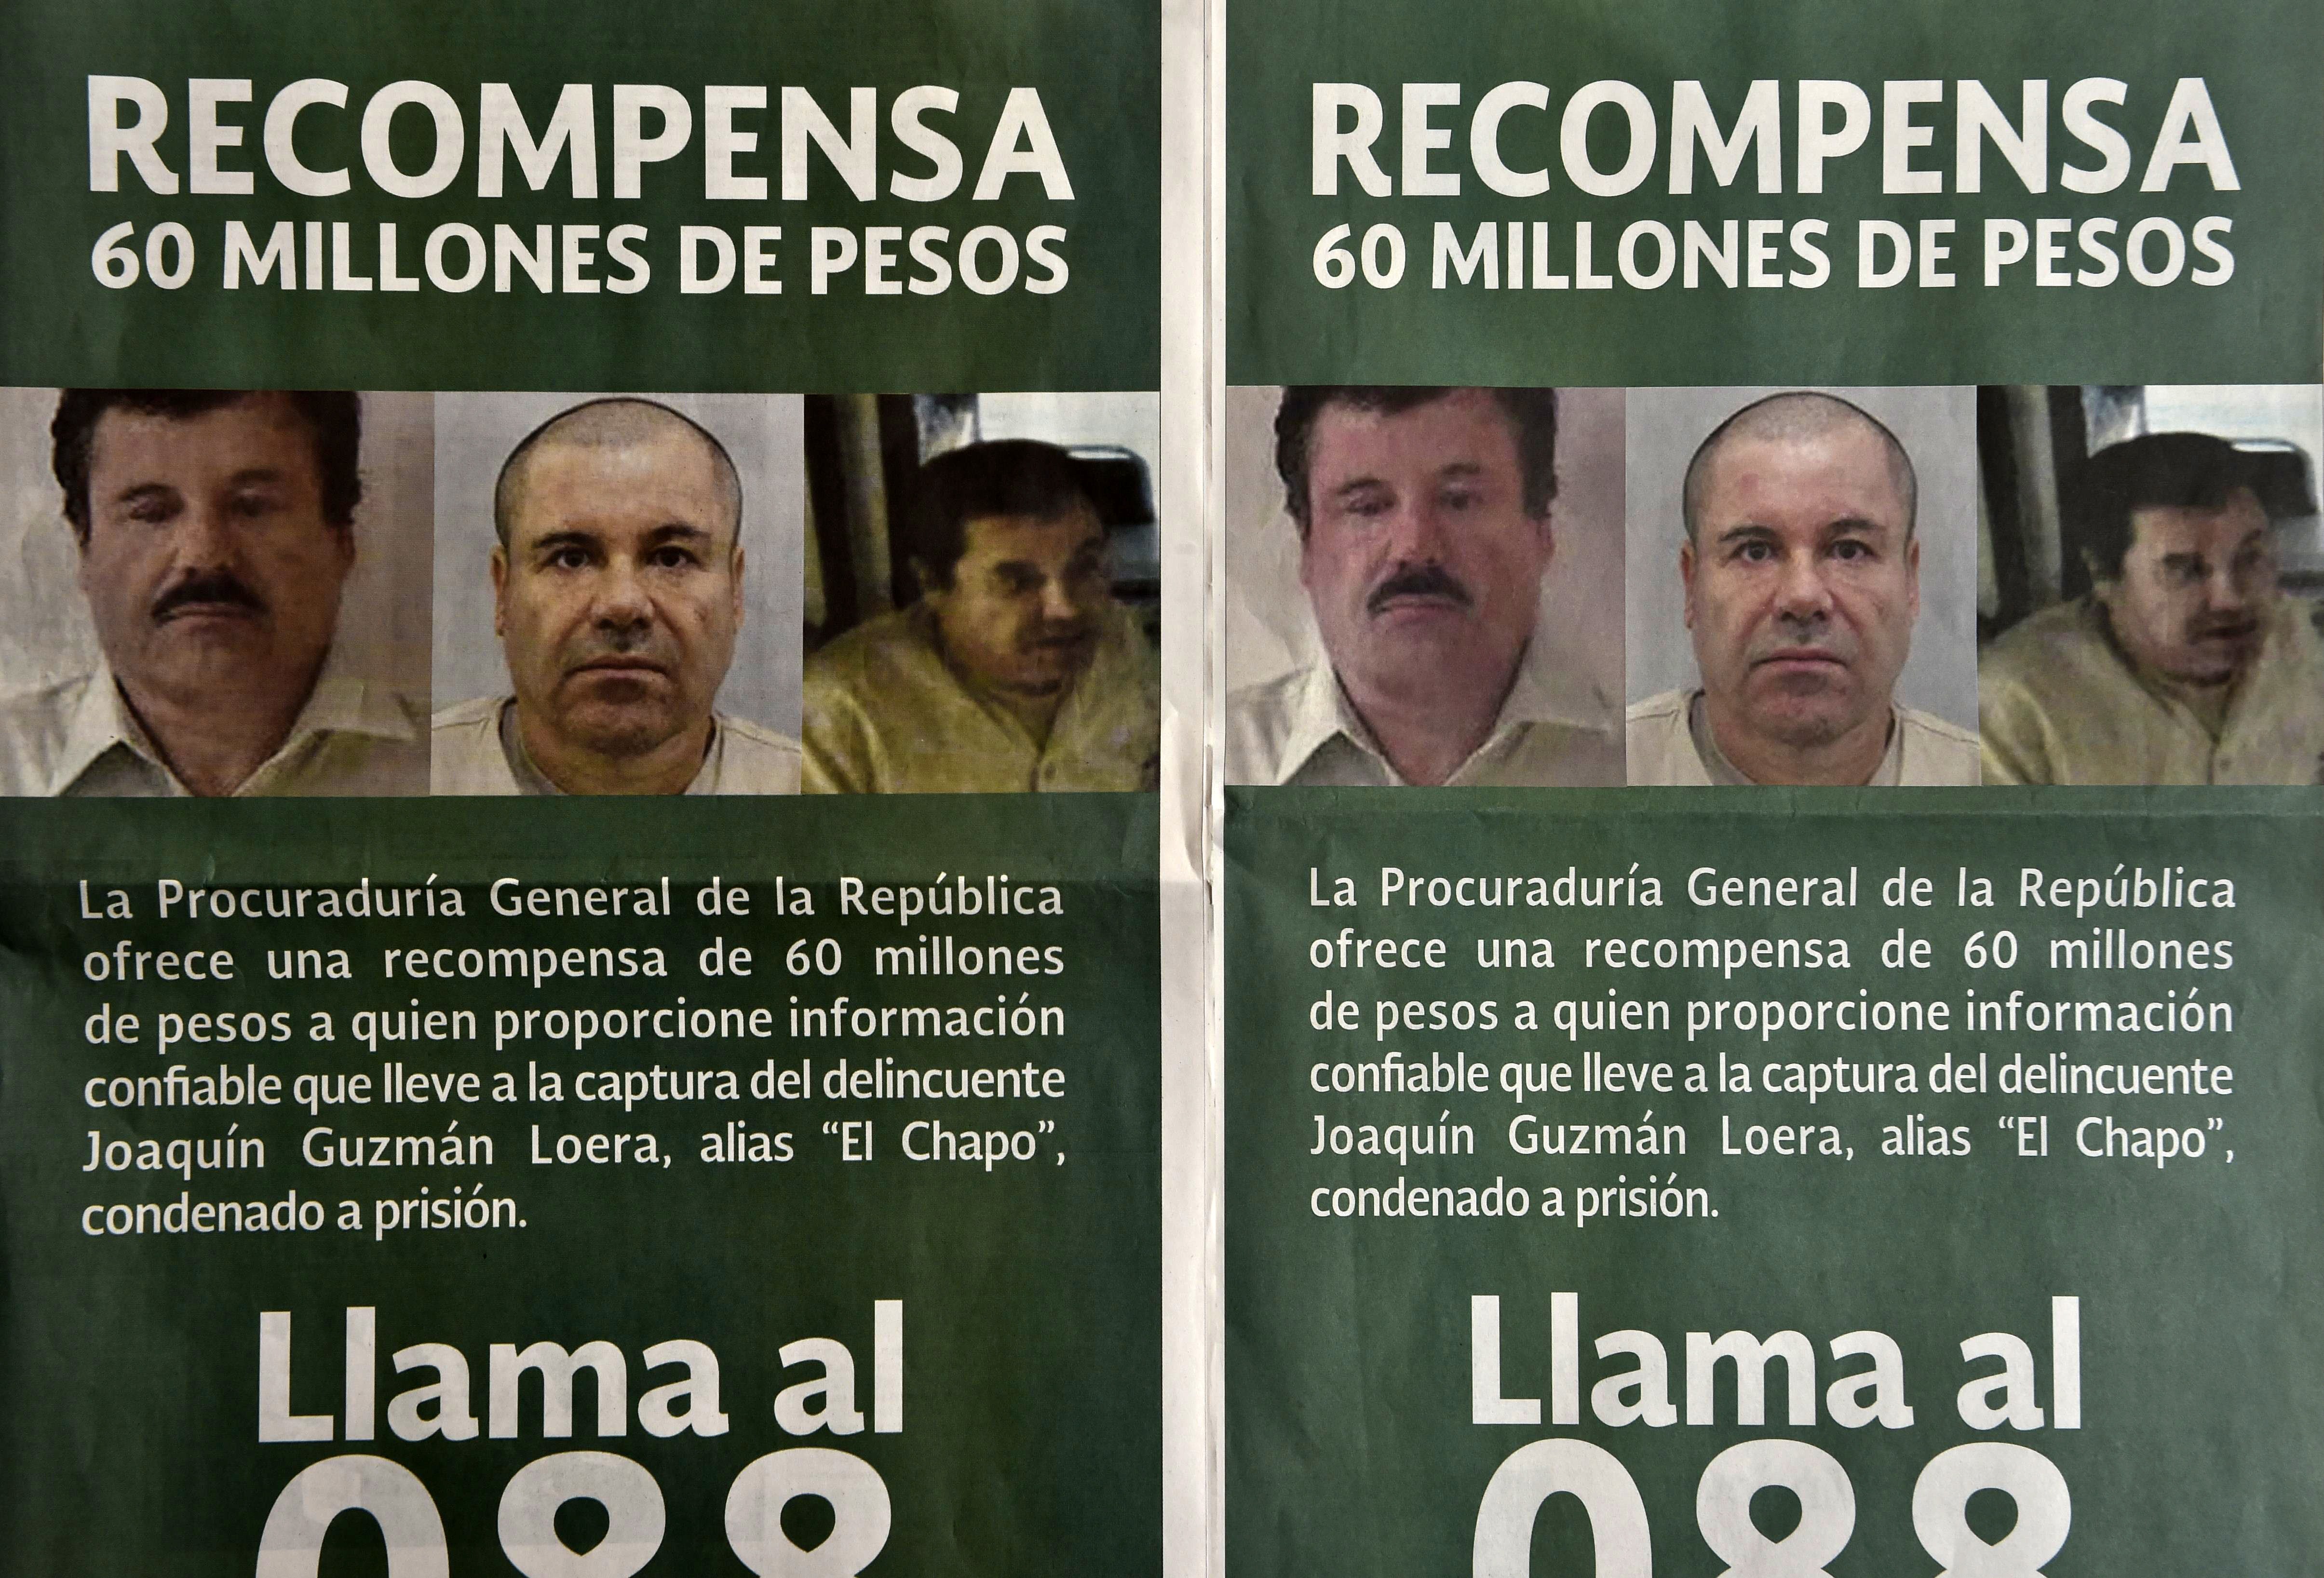 Photo of notices published in newspapers offering 60 million Mexican pesos (3.8 USD approximately) reward to anyone with information leading to the recapture of Joaquin "El Chapo" Guzman Loera in Mexico City on July 16, 2015. YURI CORTEZ/AFP/Getty Images